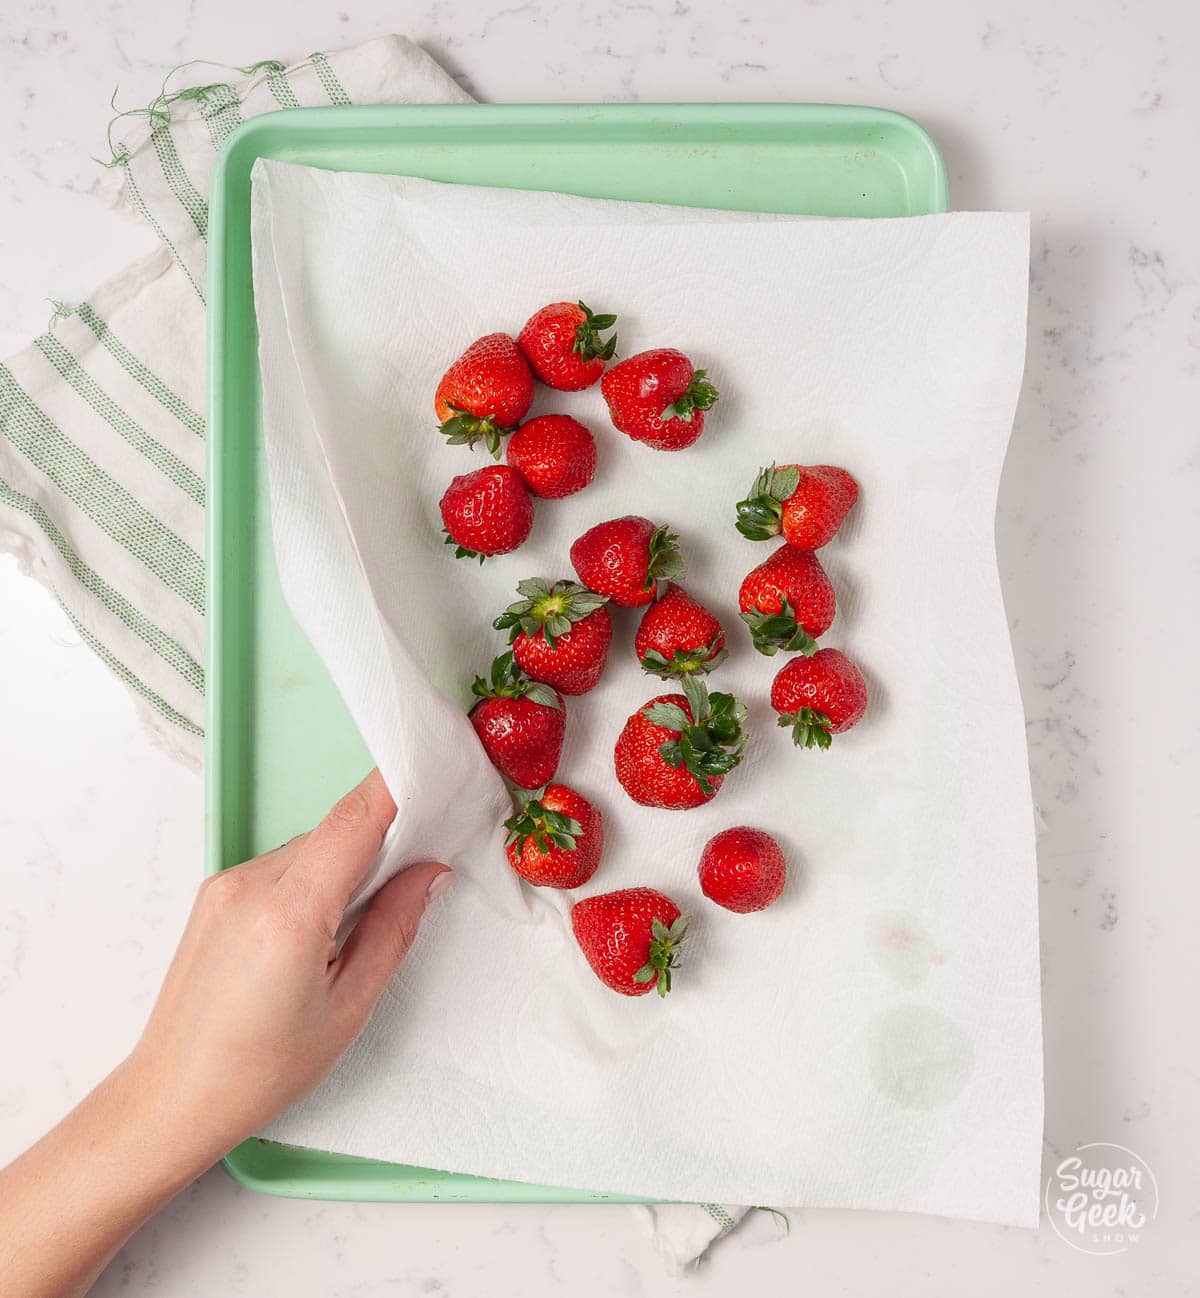 strawberries on paper towels on a green cookie sheet shot from above with a hand